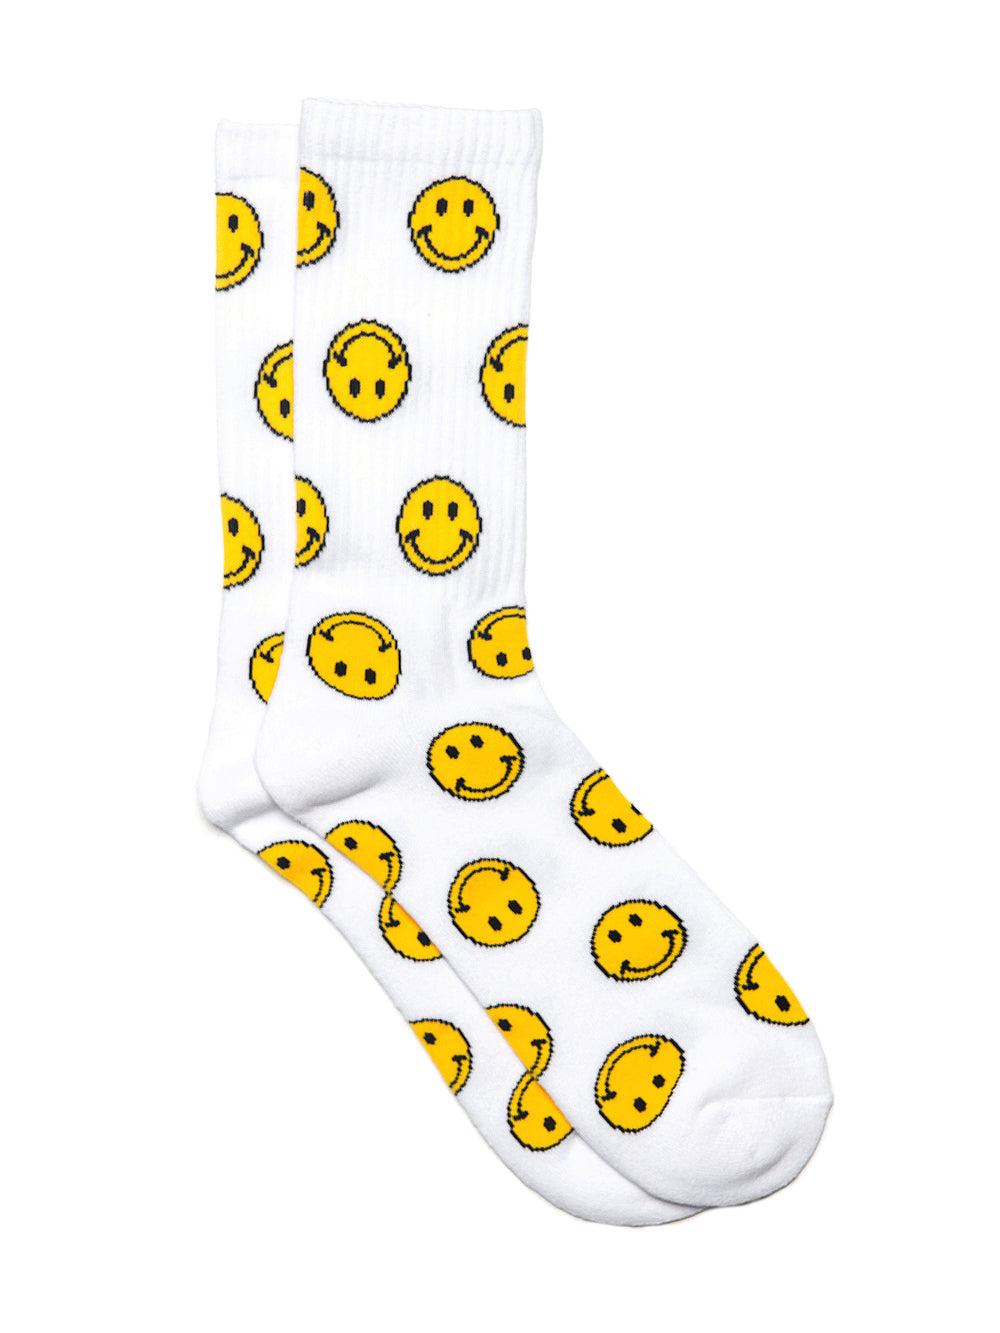 SCOUT & TRAIL SMILEY FACE SOCKS